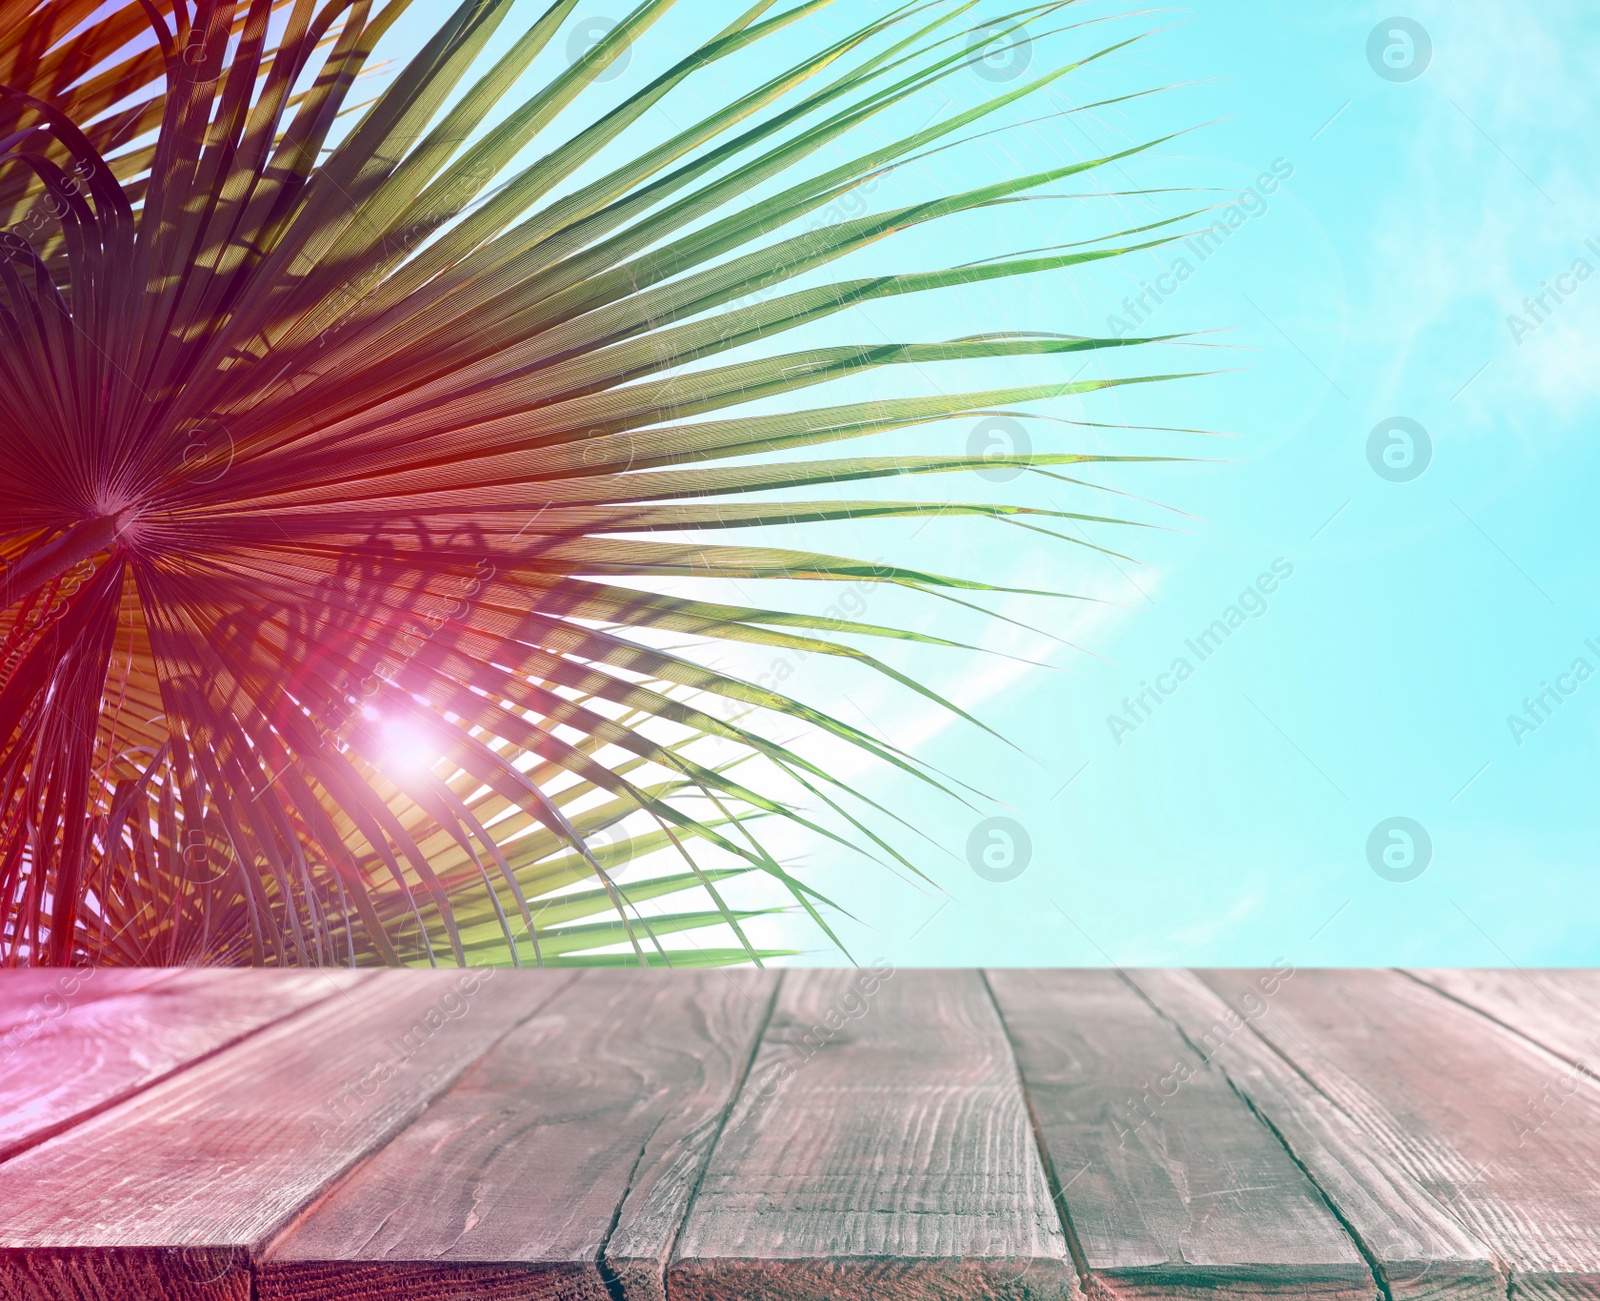 Image of Palm branches and wooden table against blue sky, color tone effect. Summer party